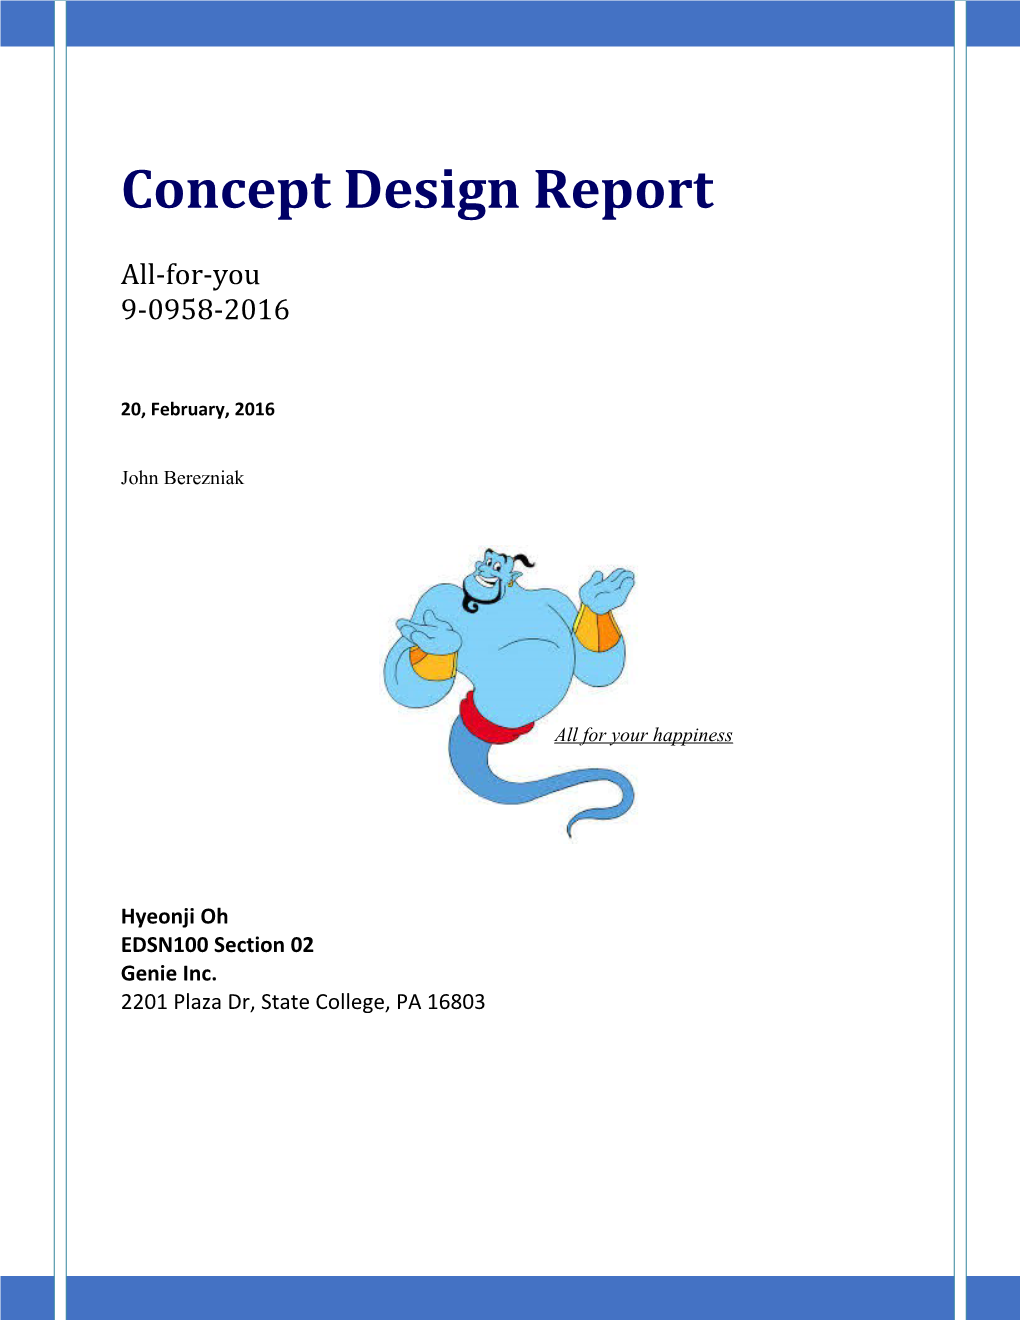 Project Concept Report Template s1